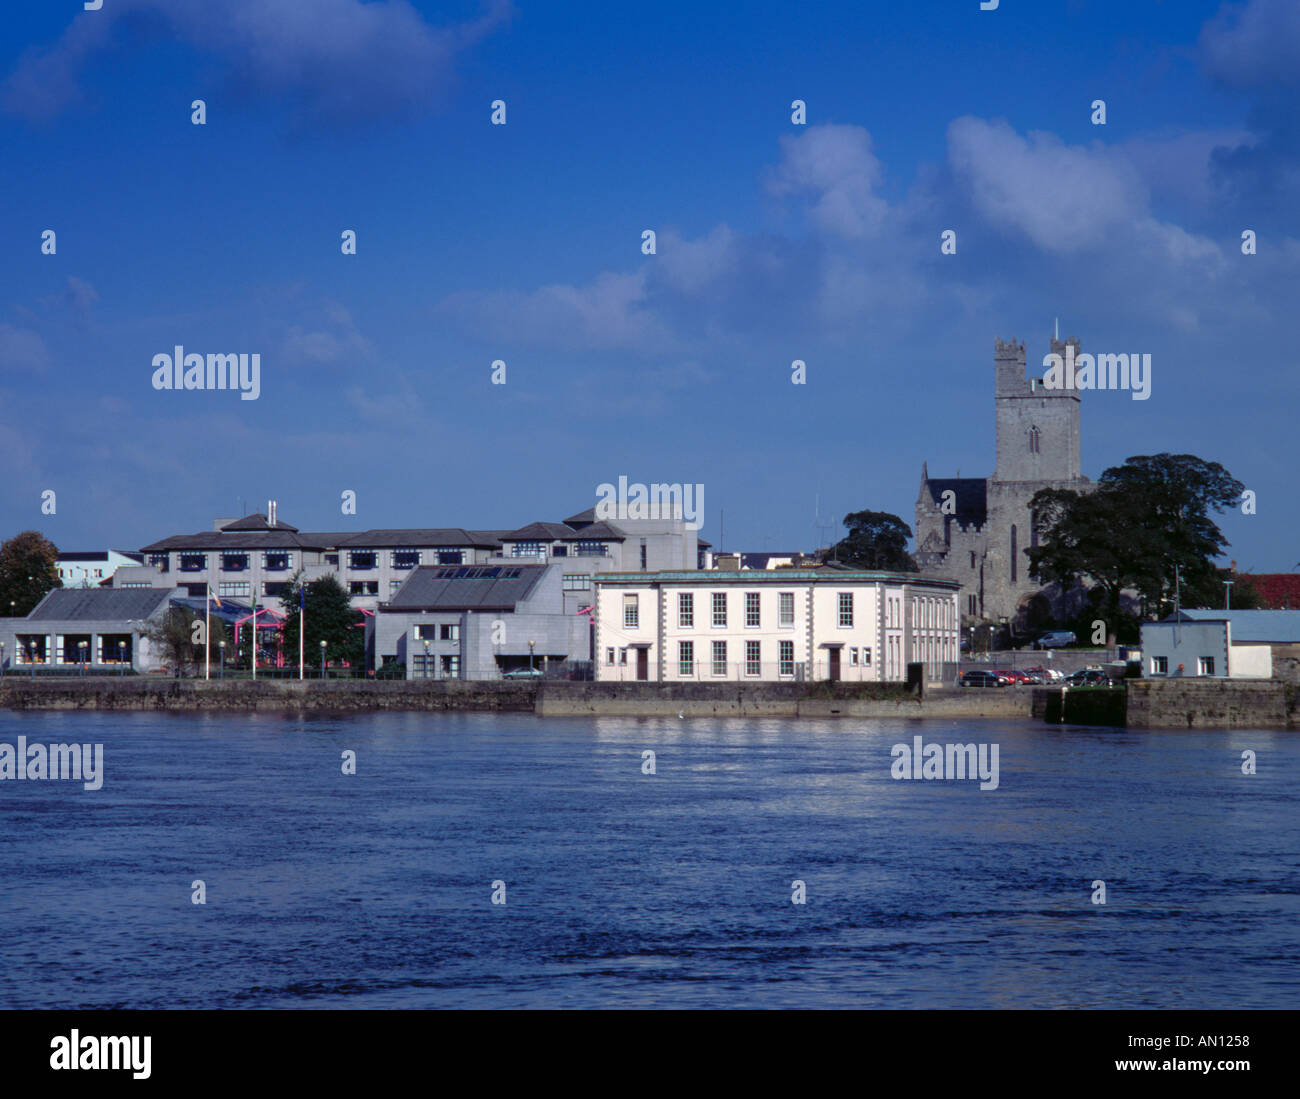 Part of the 'English Town' seen over the River Shannon, Limerick, County Limerick, Eire (Ireland). Stock Photo